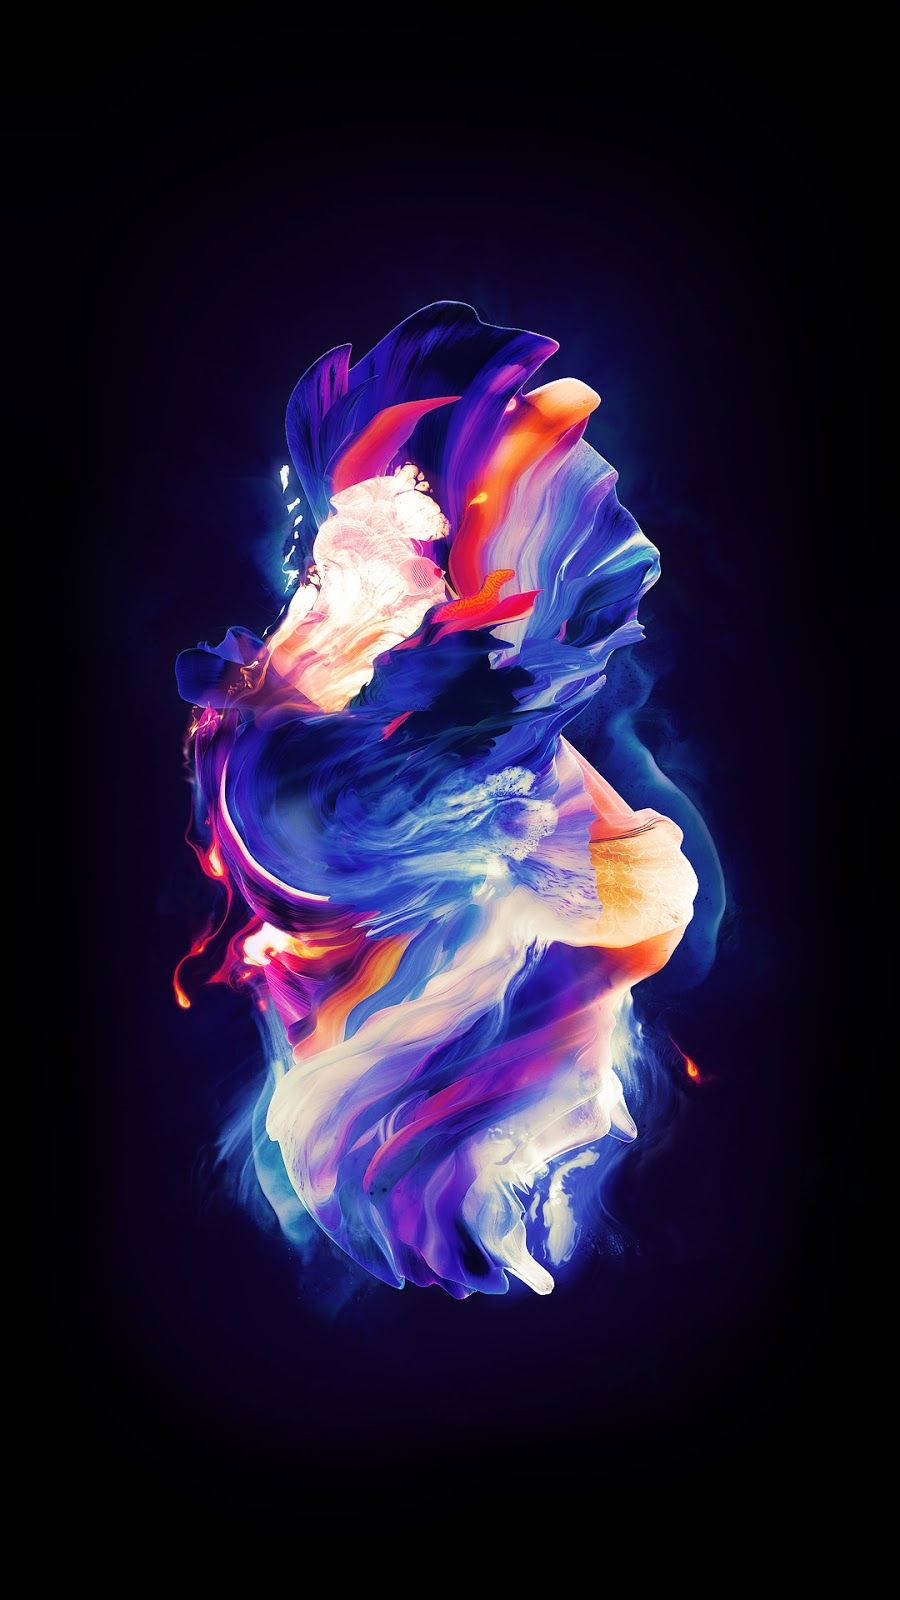 Colorful Unique Mystery Abstract Art Wallpaper